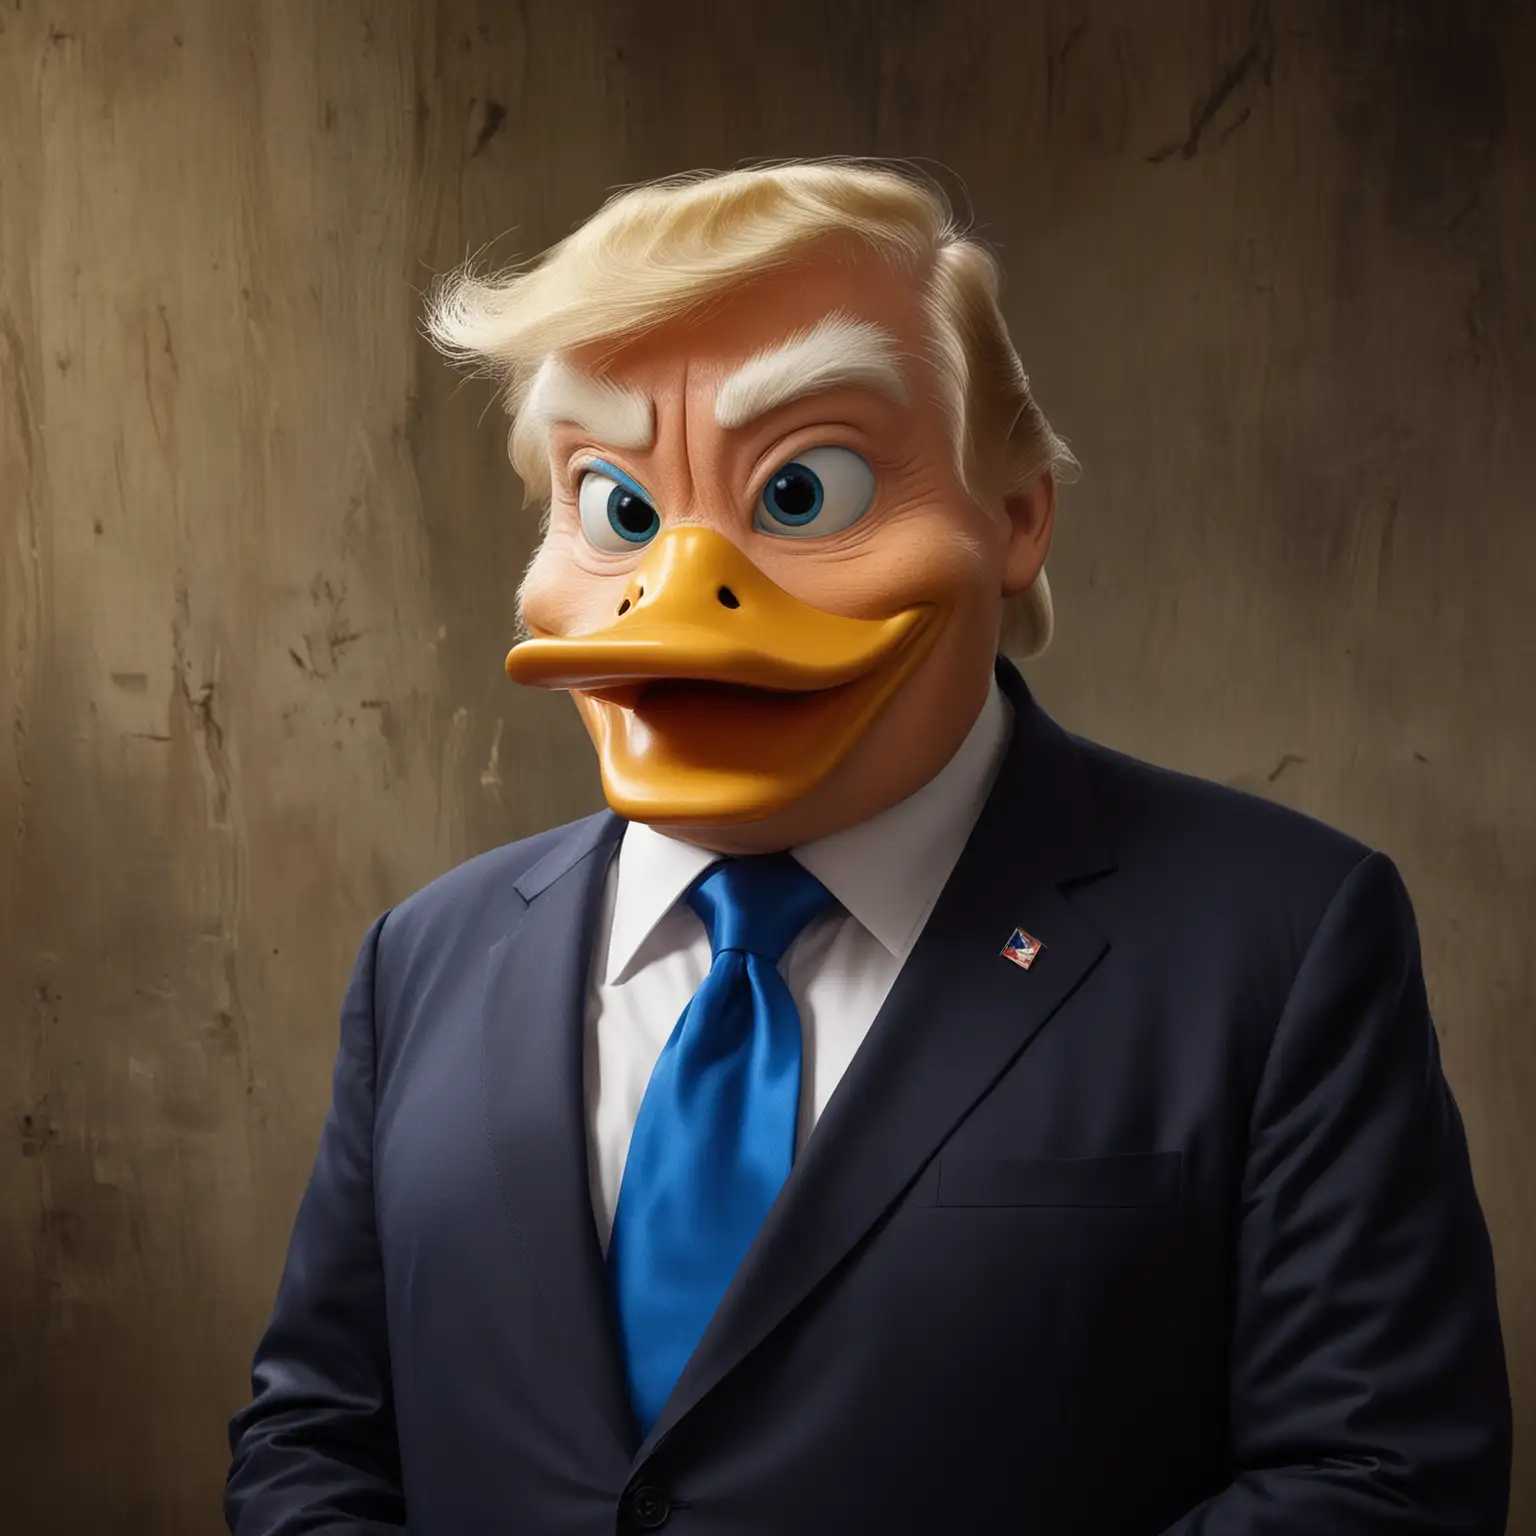 Donald Trump Dressed as Donald Duck Politician in Cartoon Character Costume